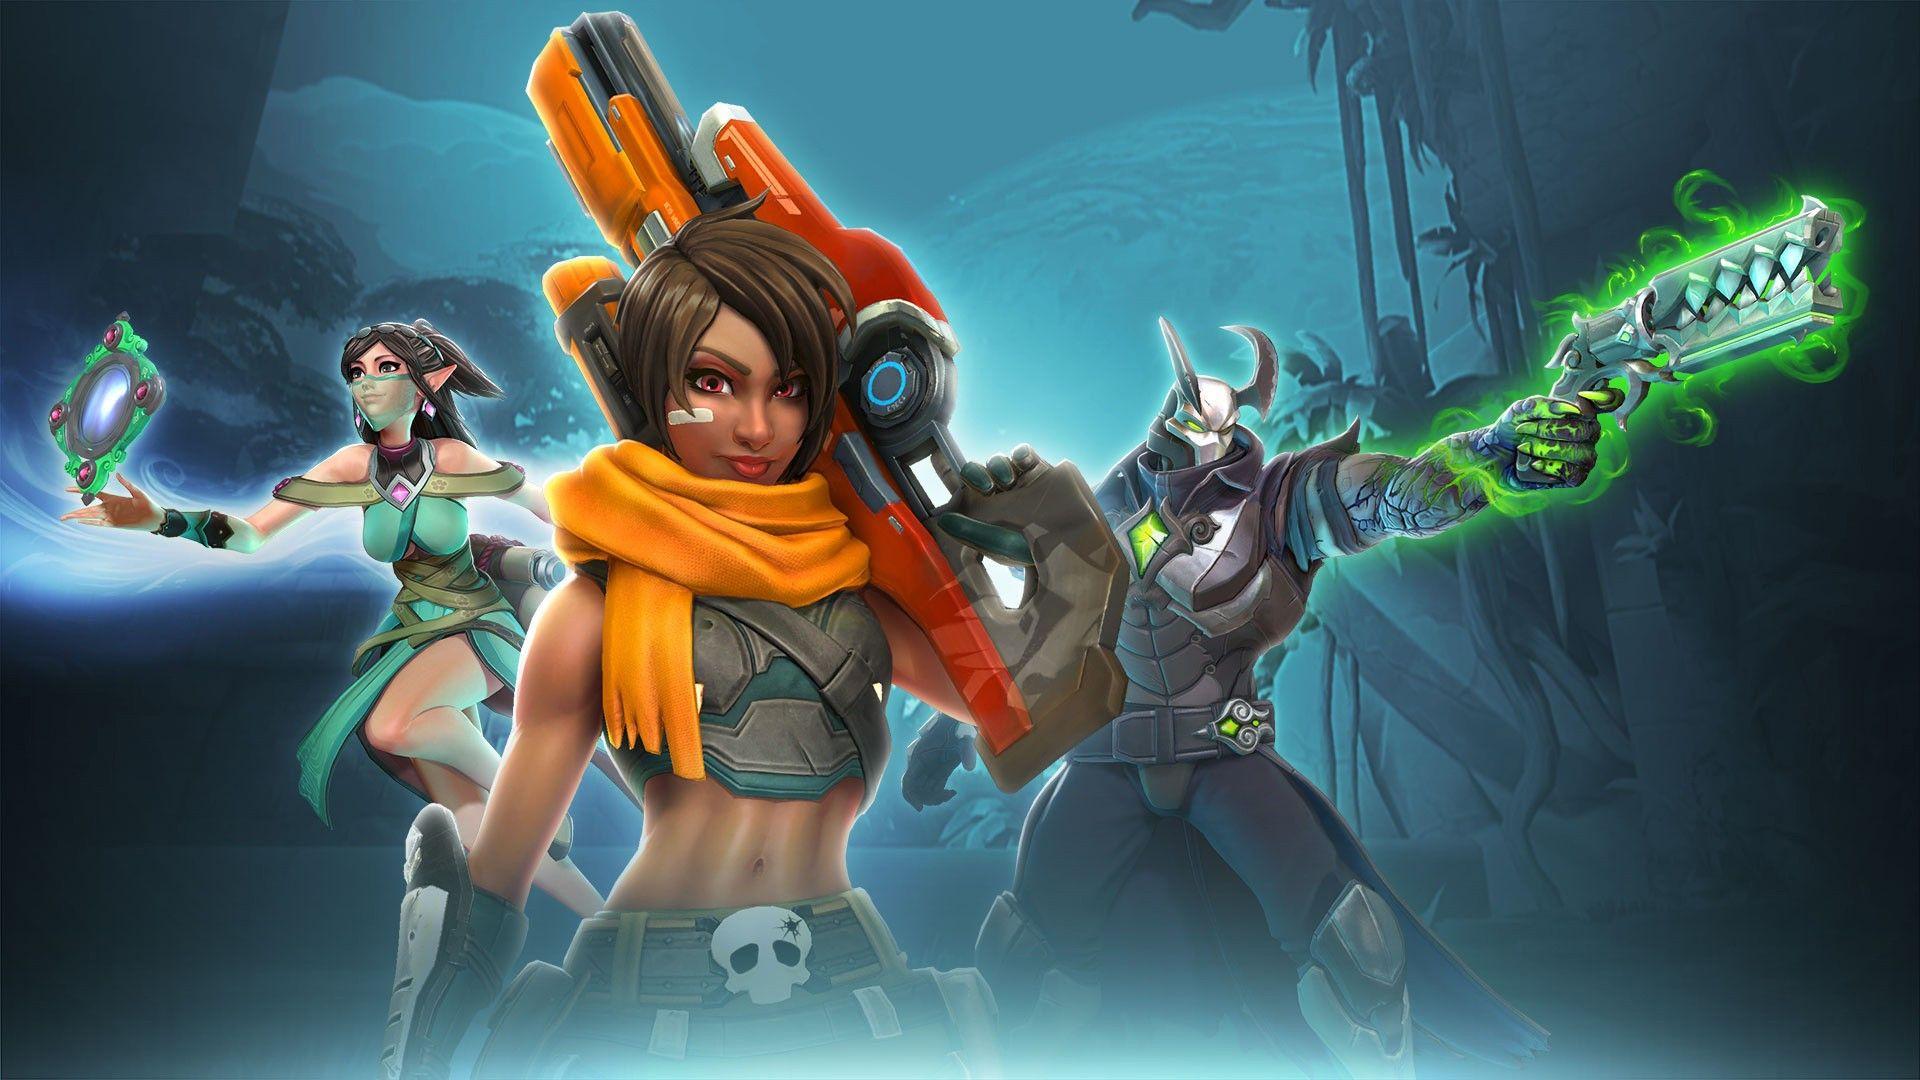 Paladins Games 2016 wide HD Wallpapers